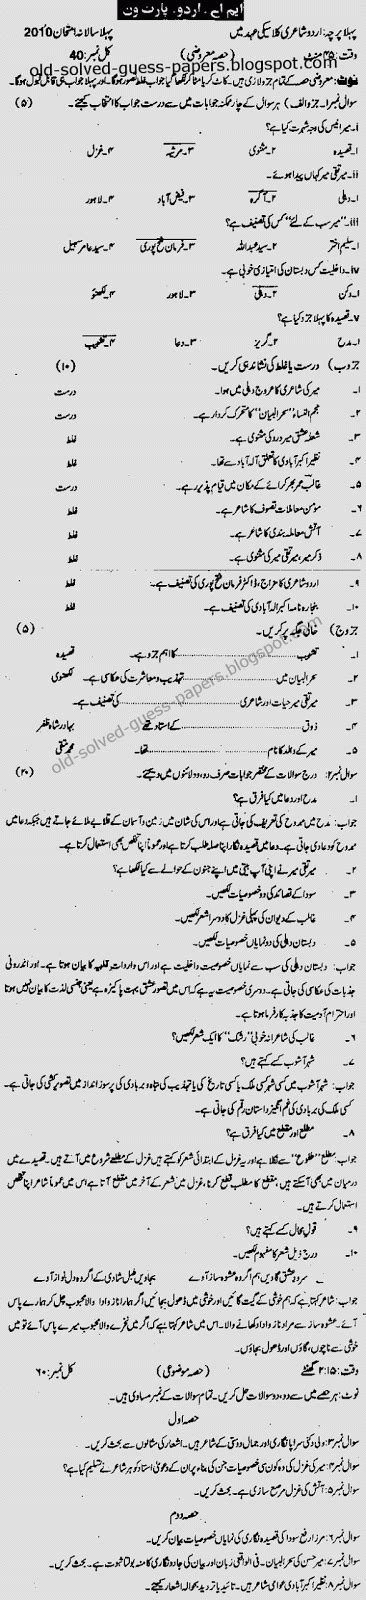 Classic Urdu Poetry Paper I Part I Old Solved And Guess Papers